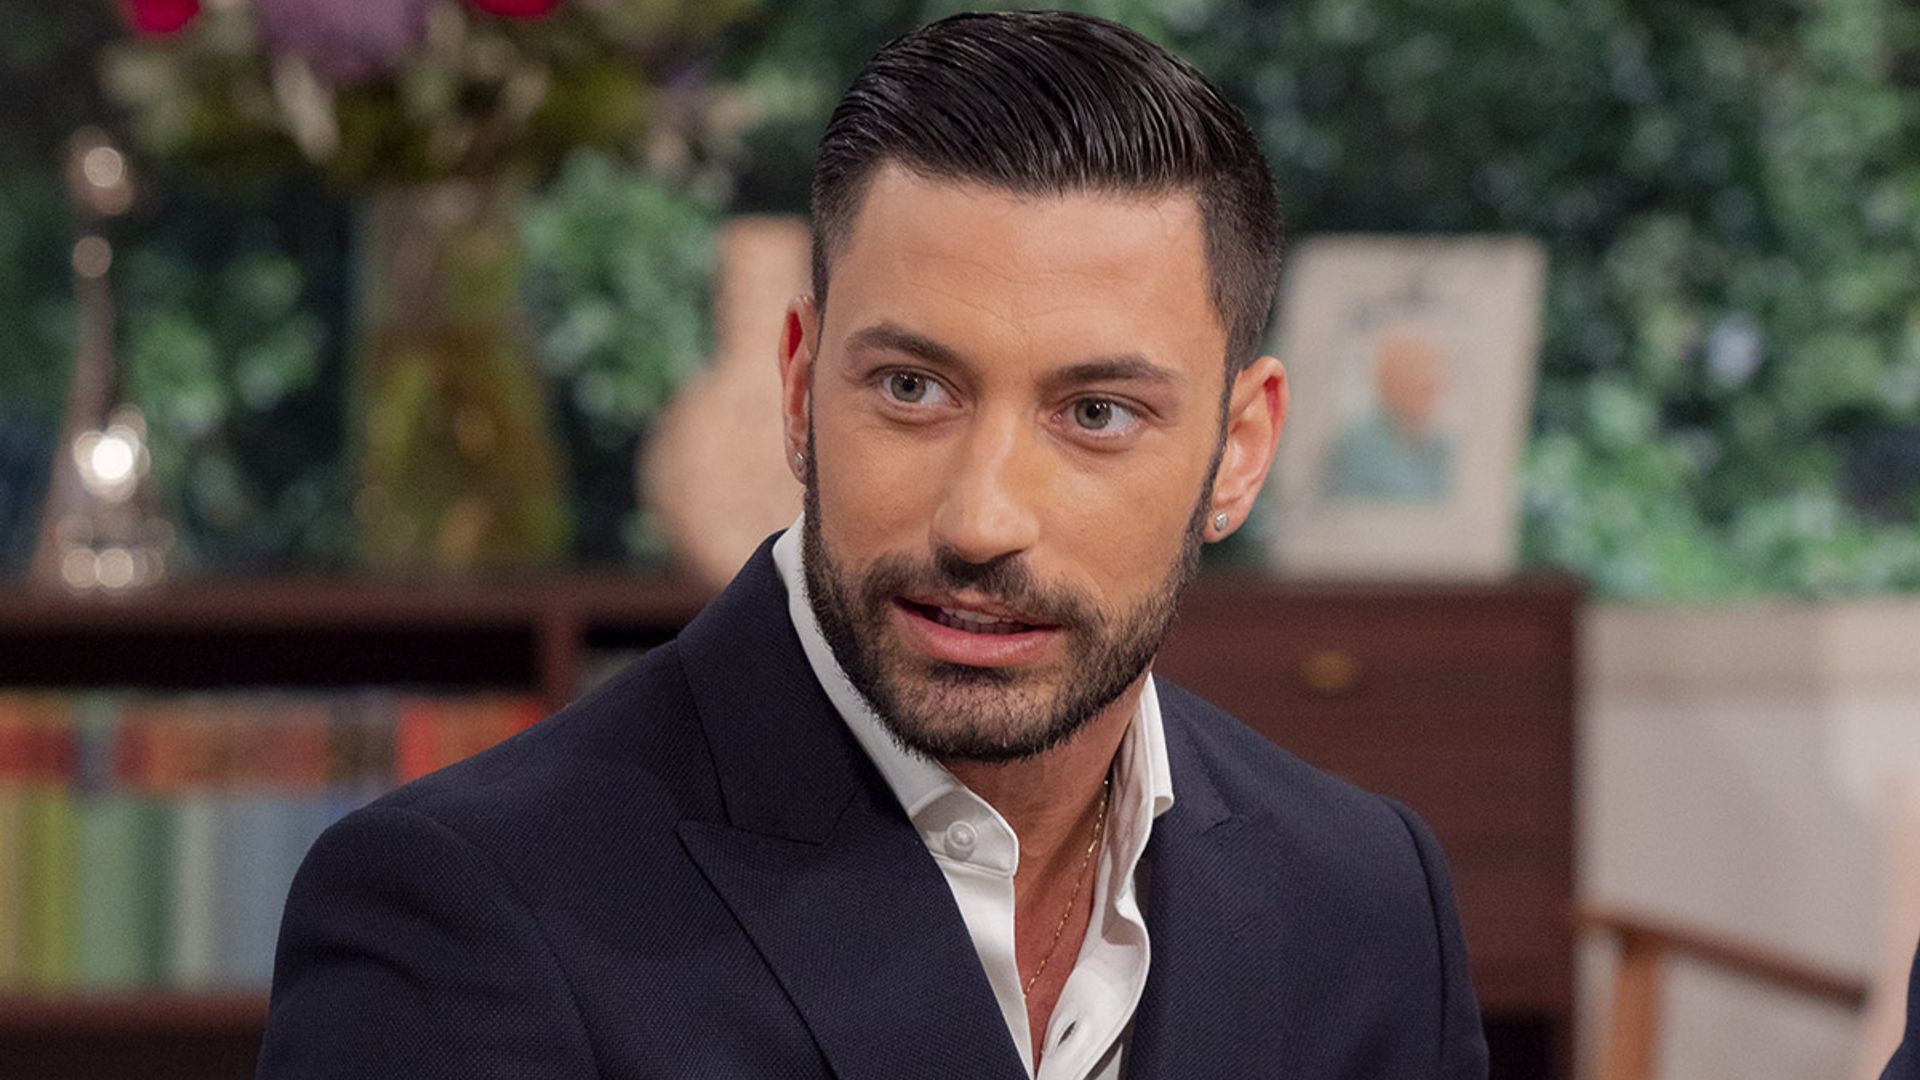 giovanni pernice shock this morning